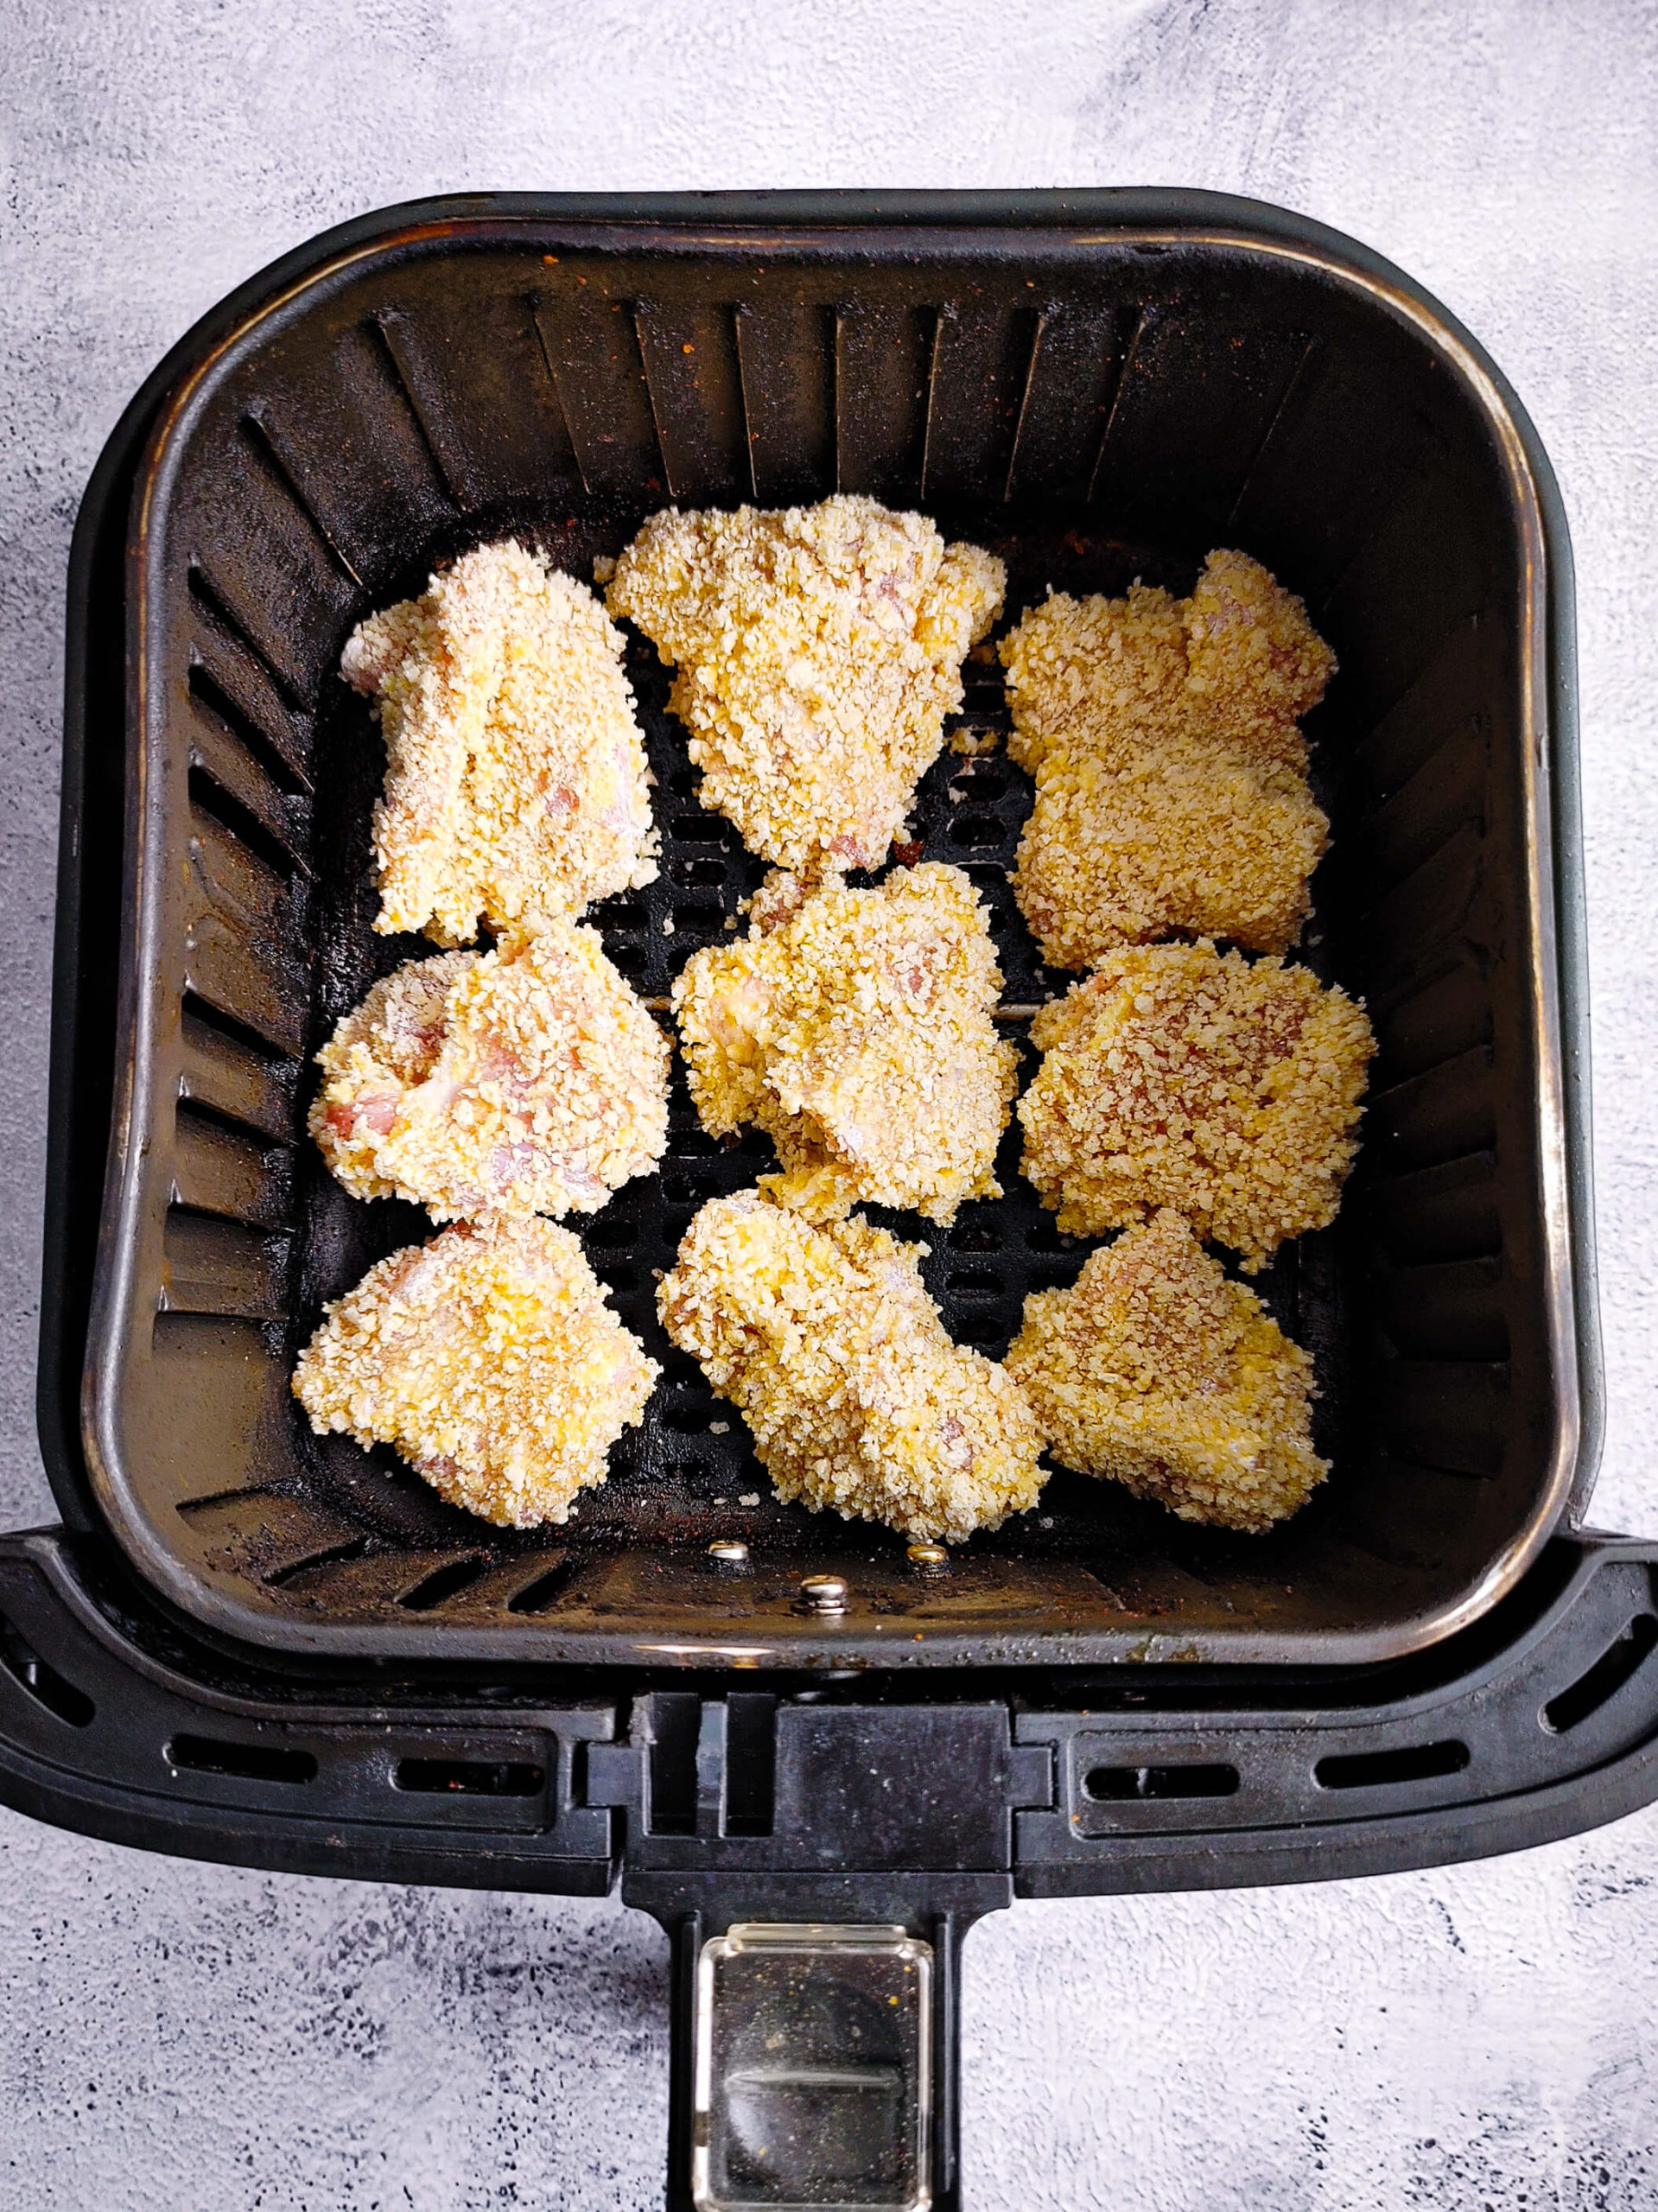 PLACE THE CHICKEN BITES INTO THE AIR FRYER BASKET